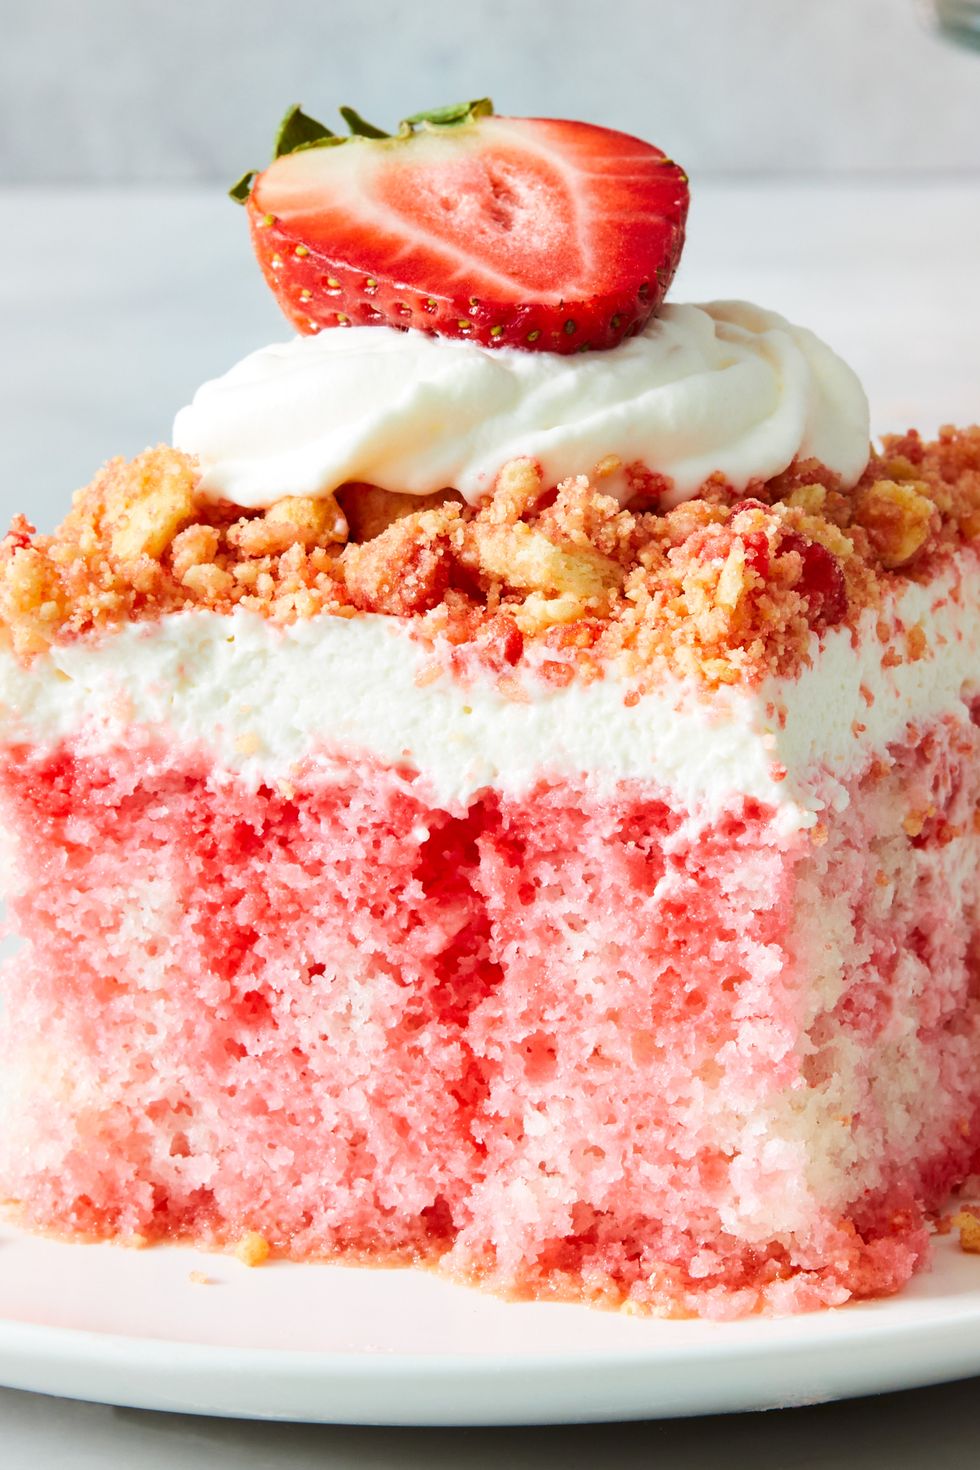 strawberry crunch poke cake with a crumble topping, whipped cream and strawberries